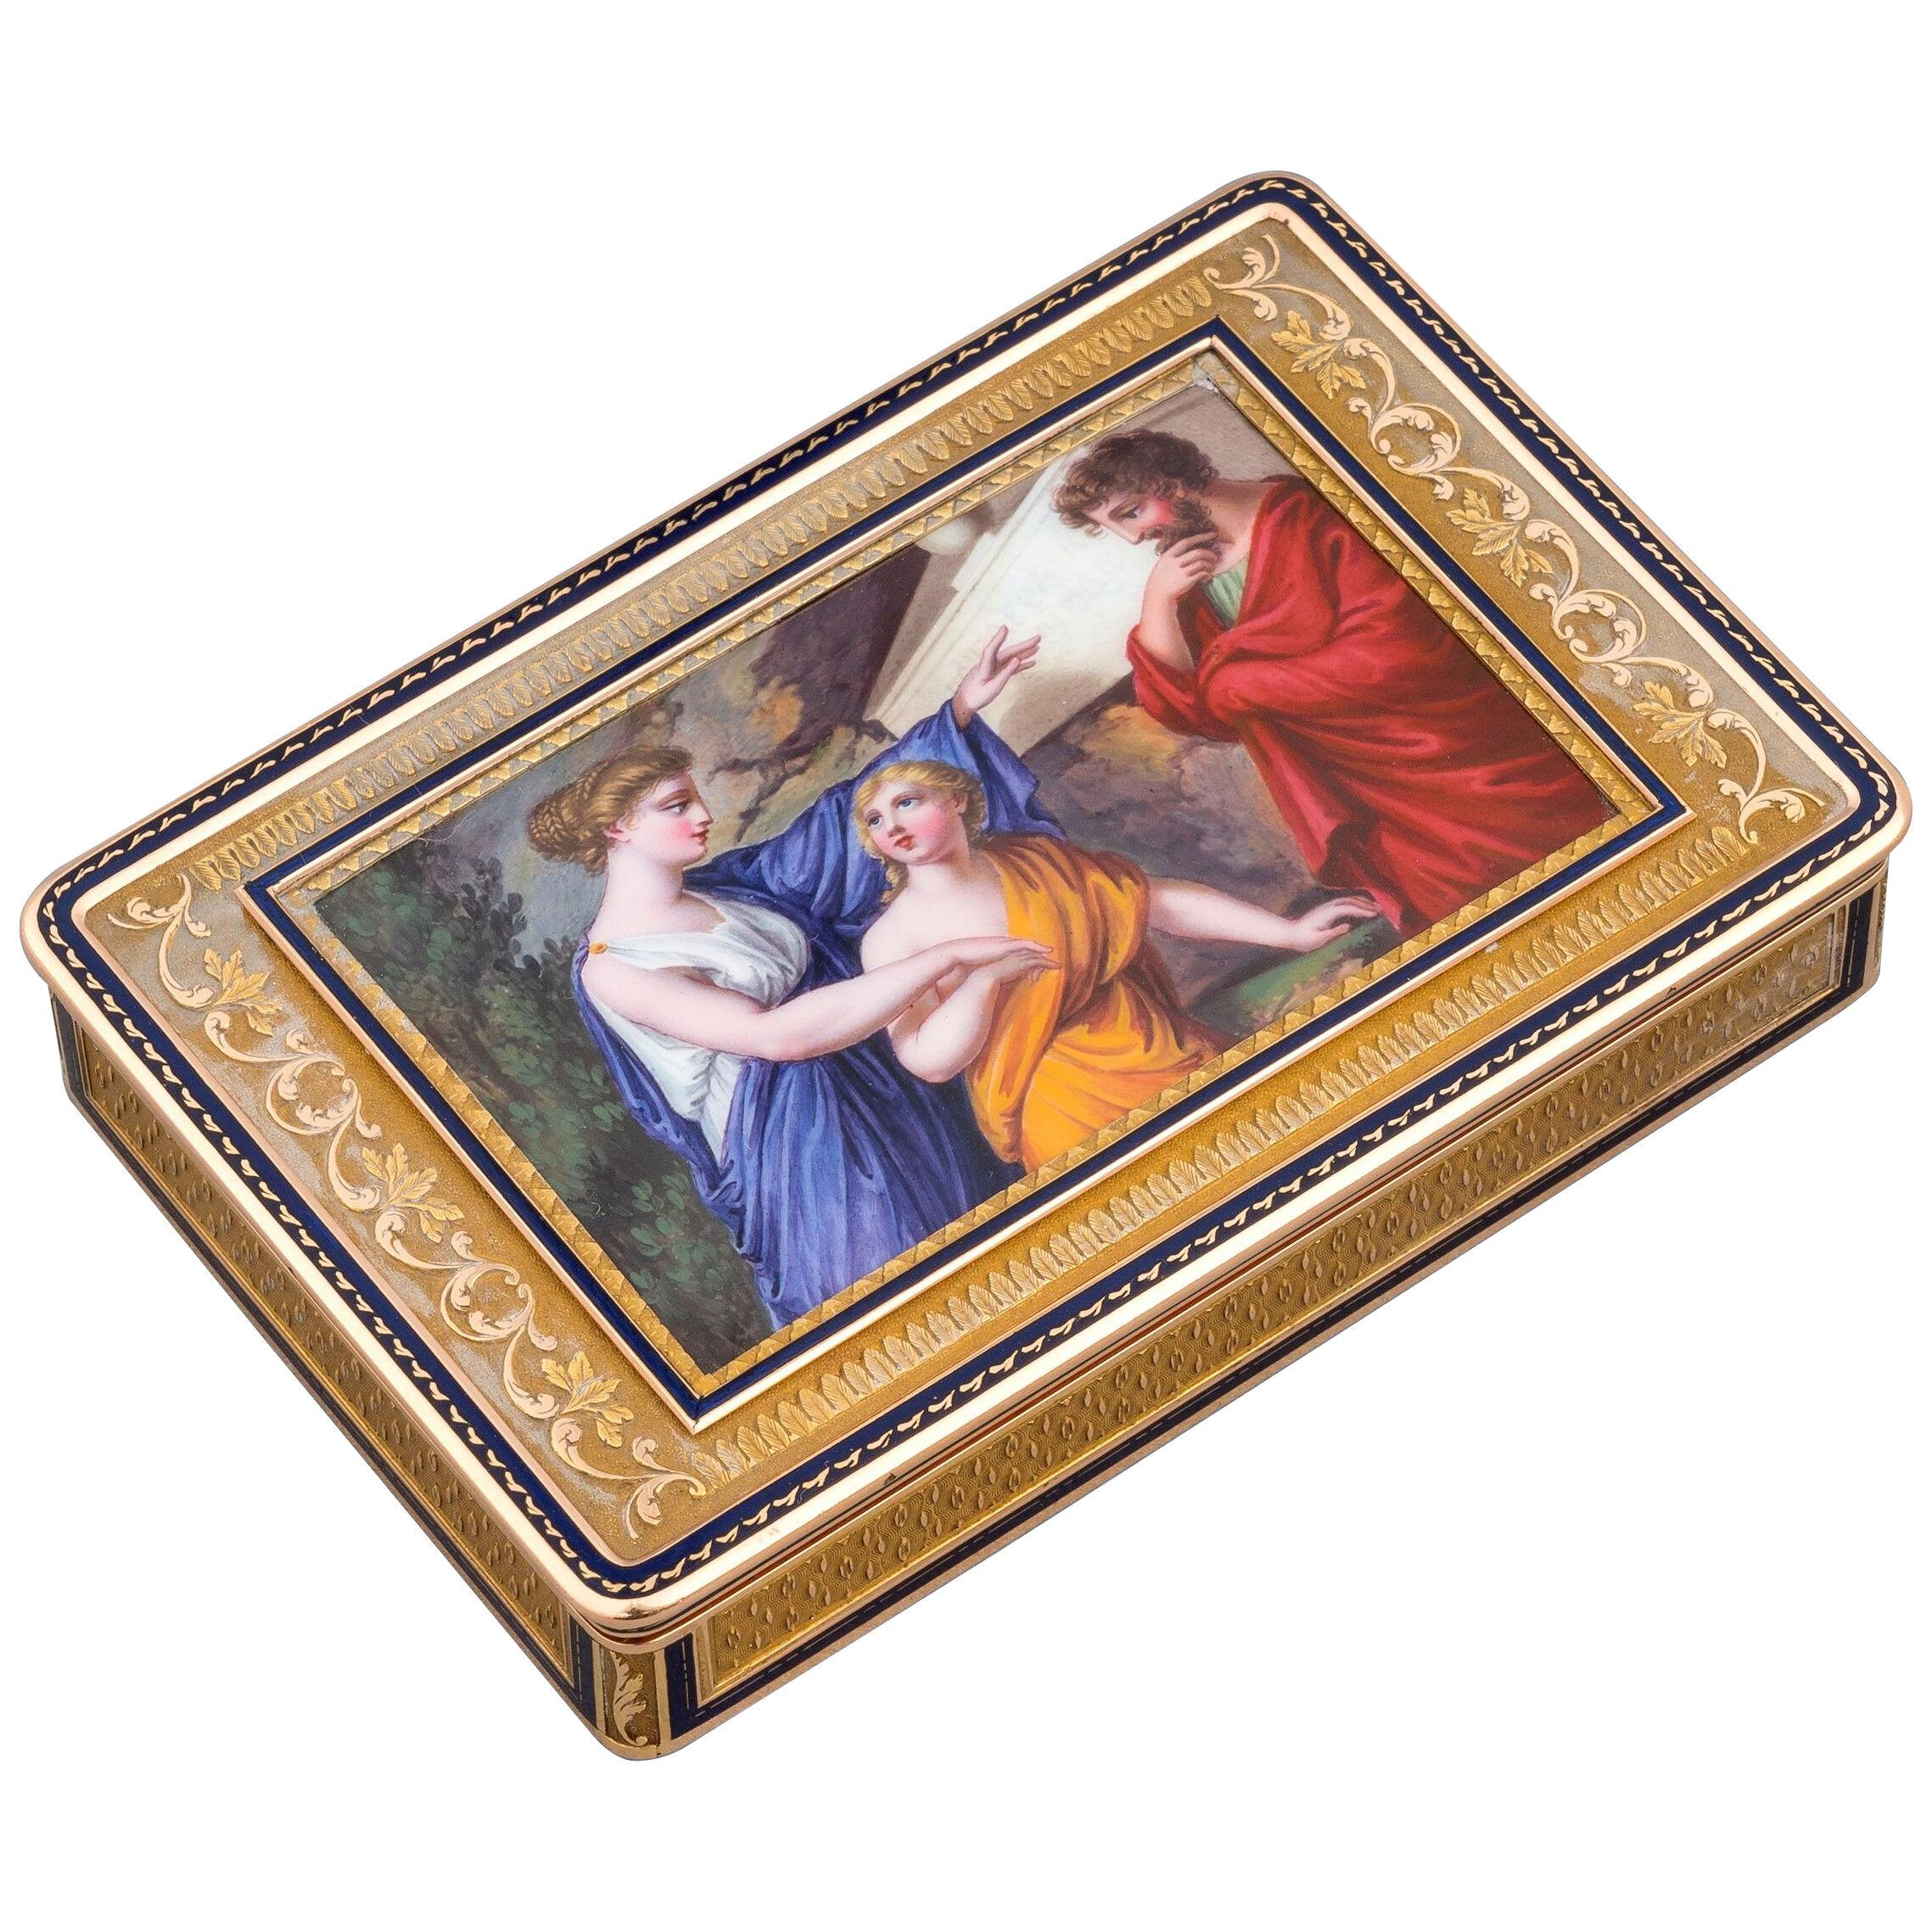 A German 19th Century Gold and Enamel Box